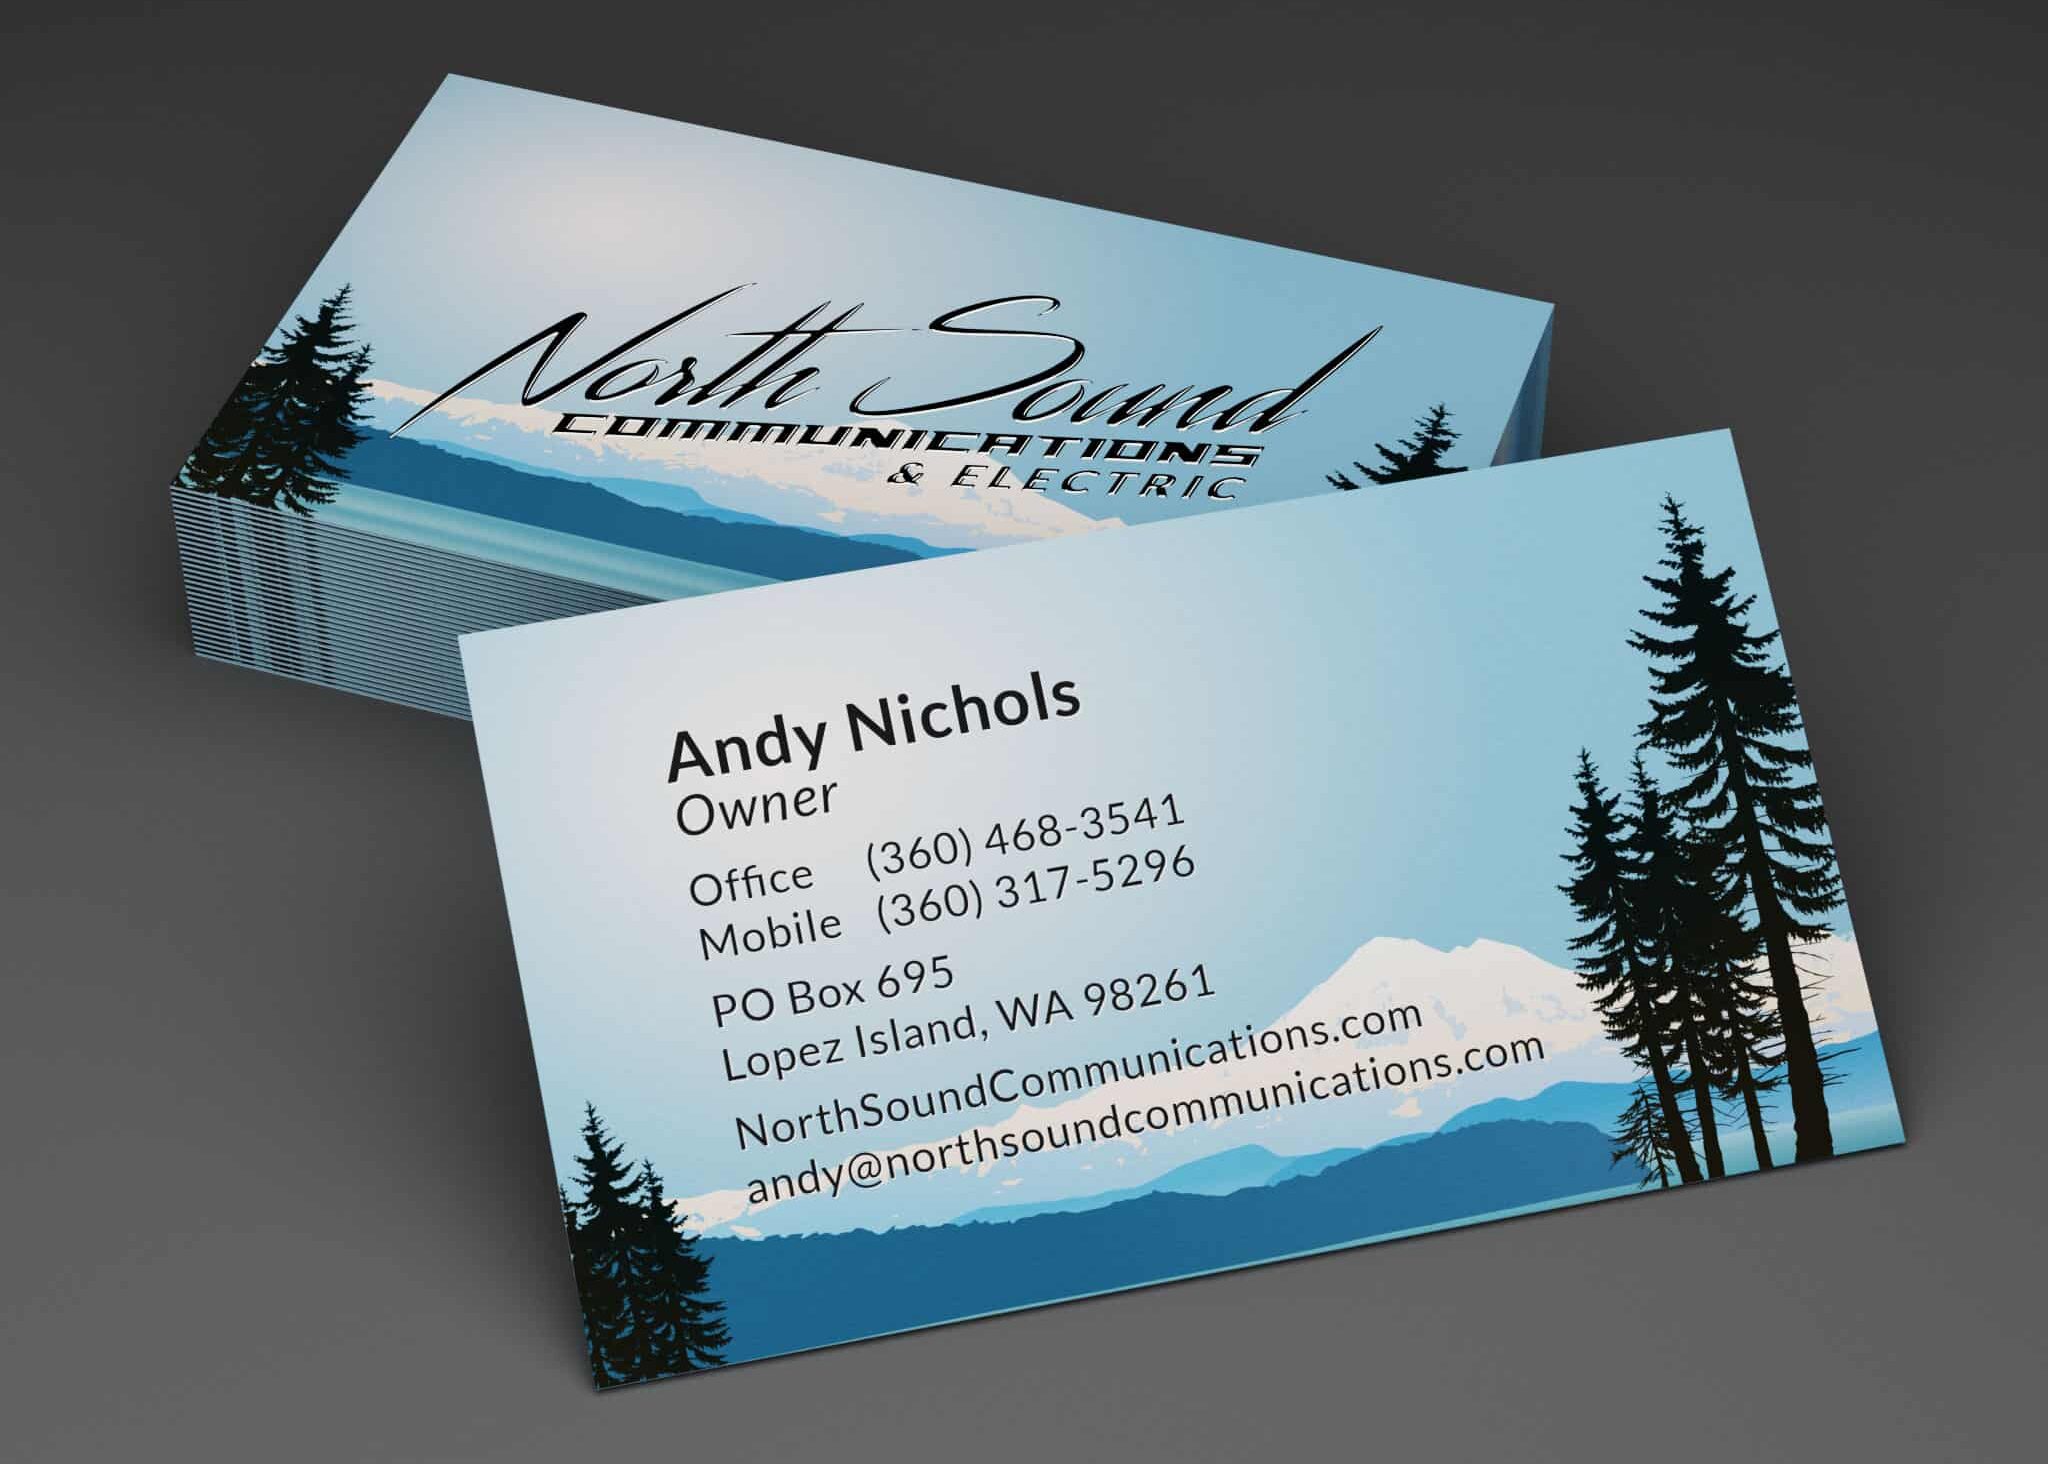 Giant Lopez Island Northsound Communications Business Card Render E1696620349215